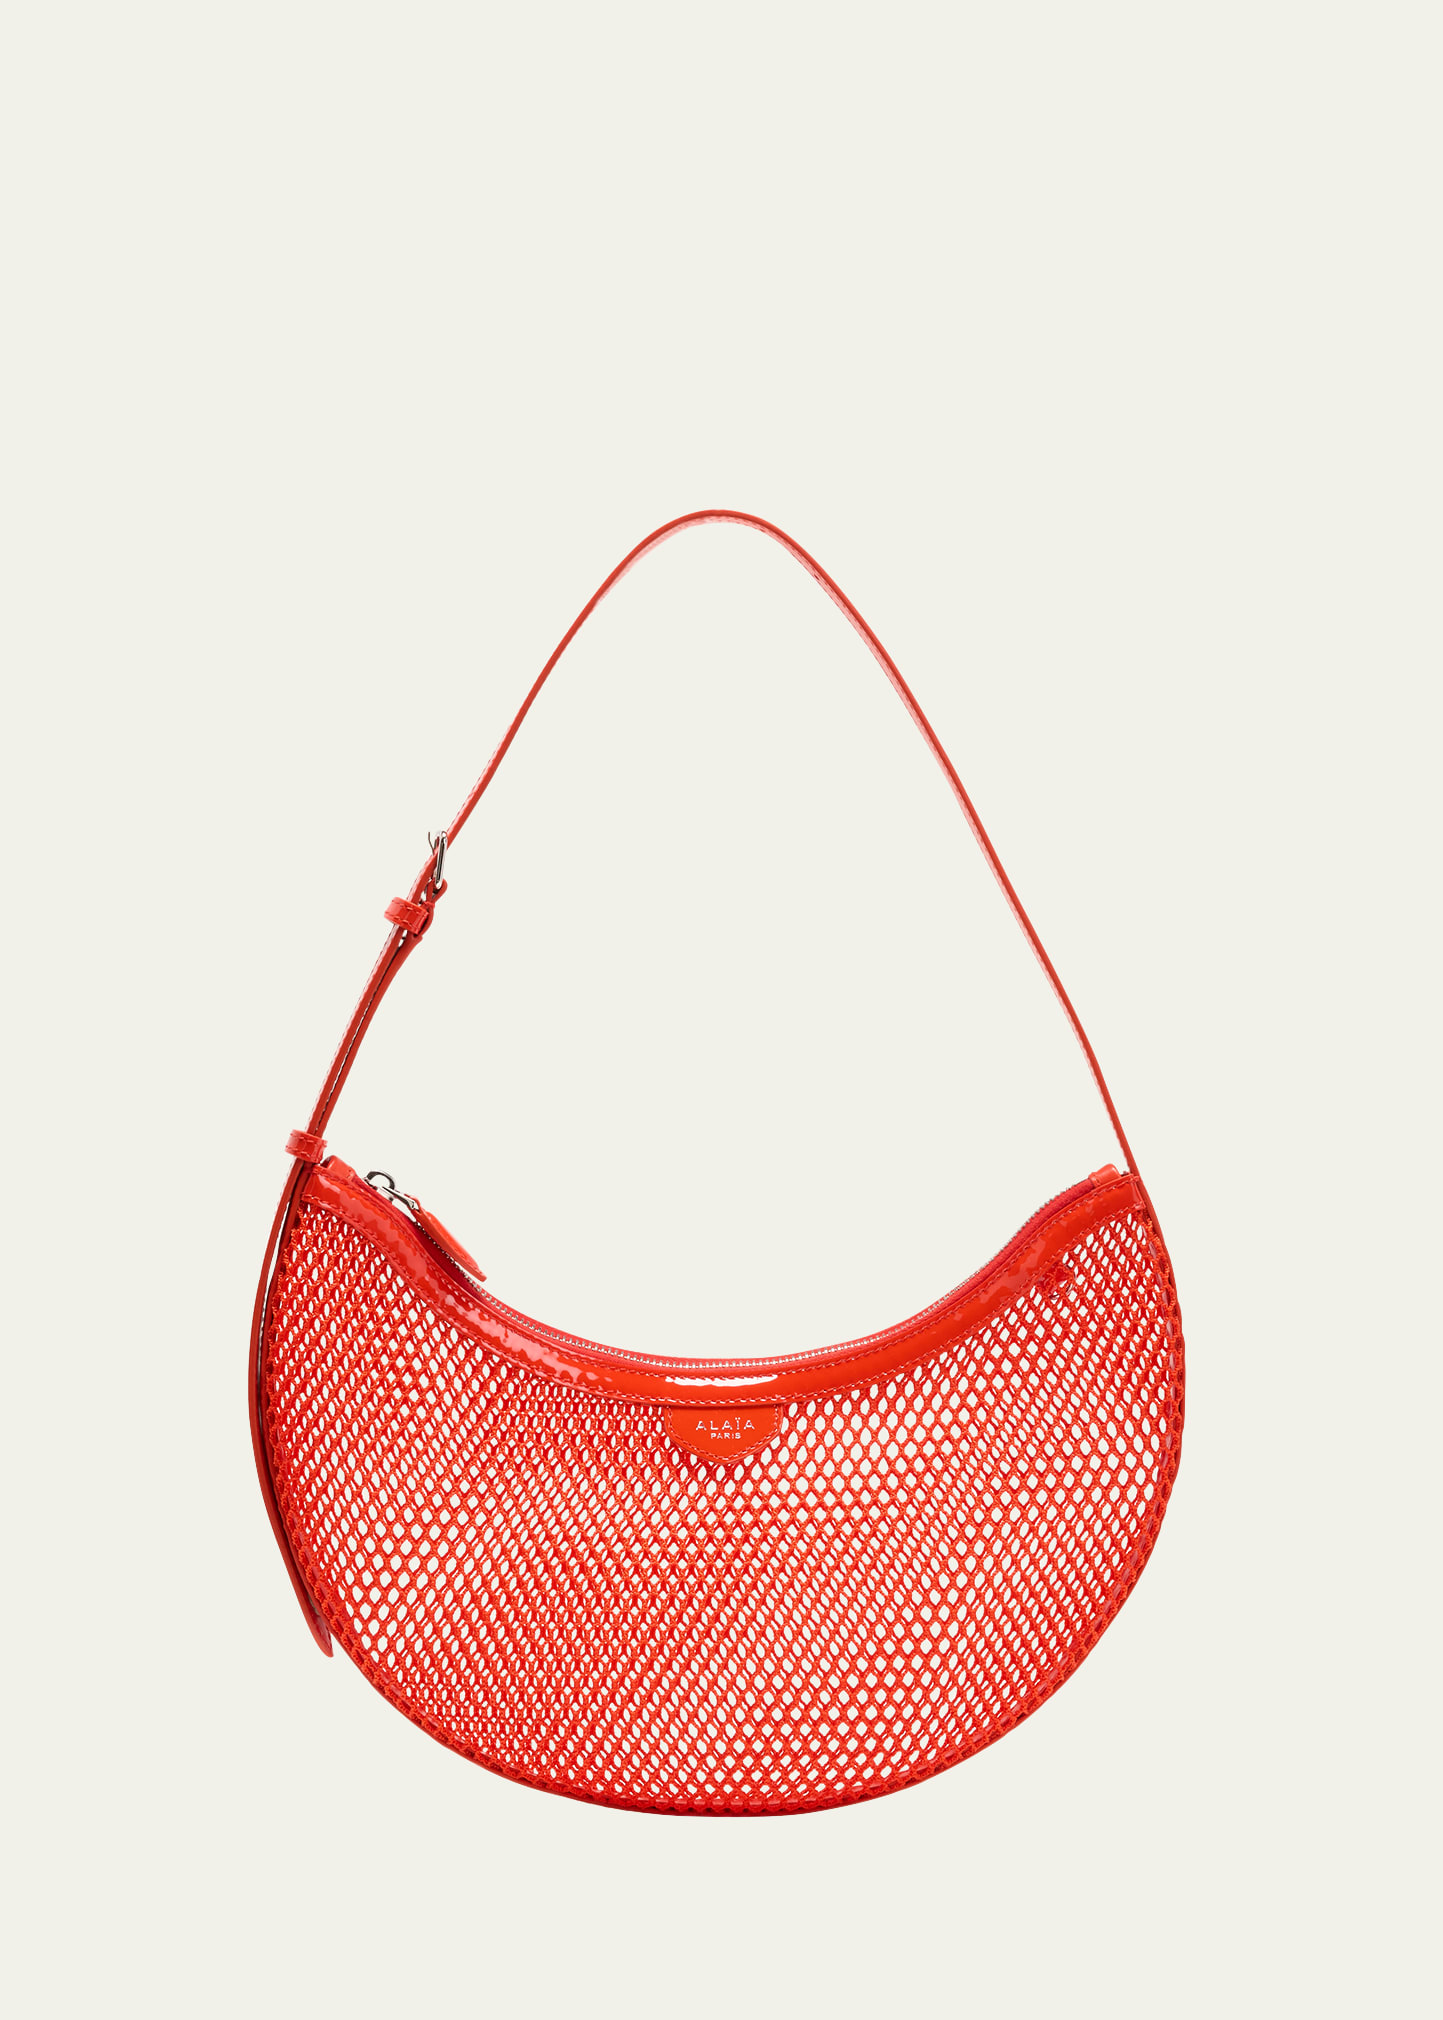 Shop Alaïa One Piece Demi Perforated Shoulder Bag In Leather And Nylon In 319 Orange Sangui